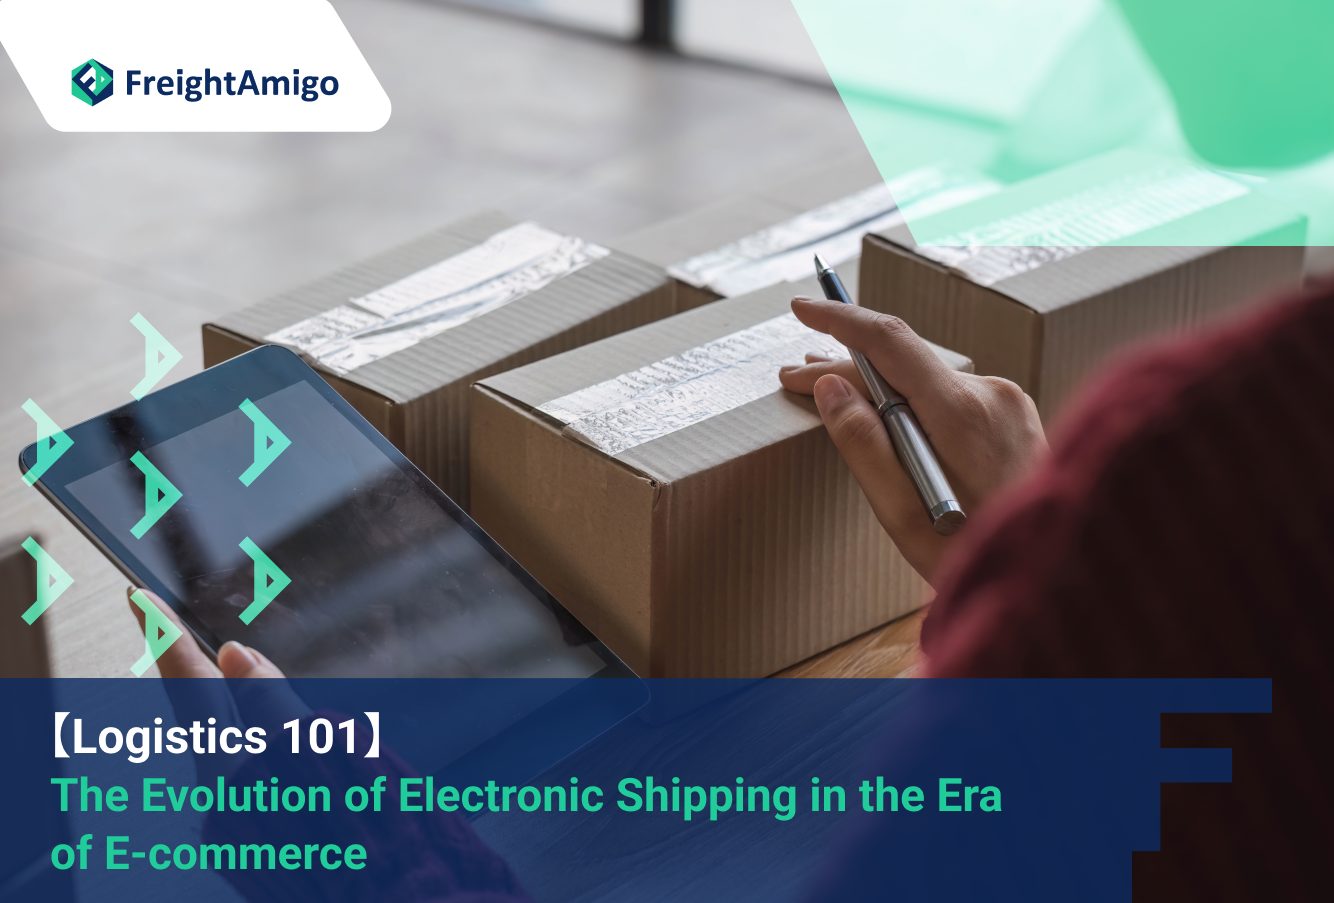 【Logistics 101】The Evolution of Electronic Shipping in the Era of E-commerce